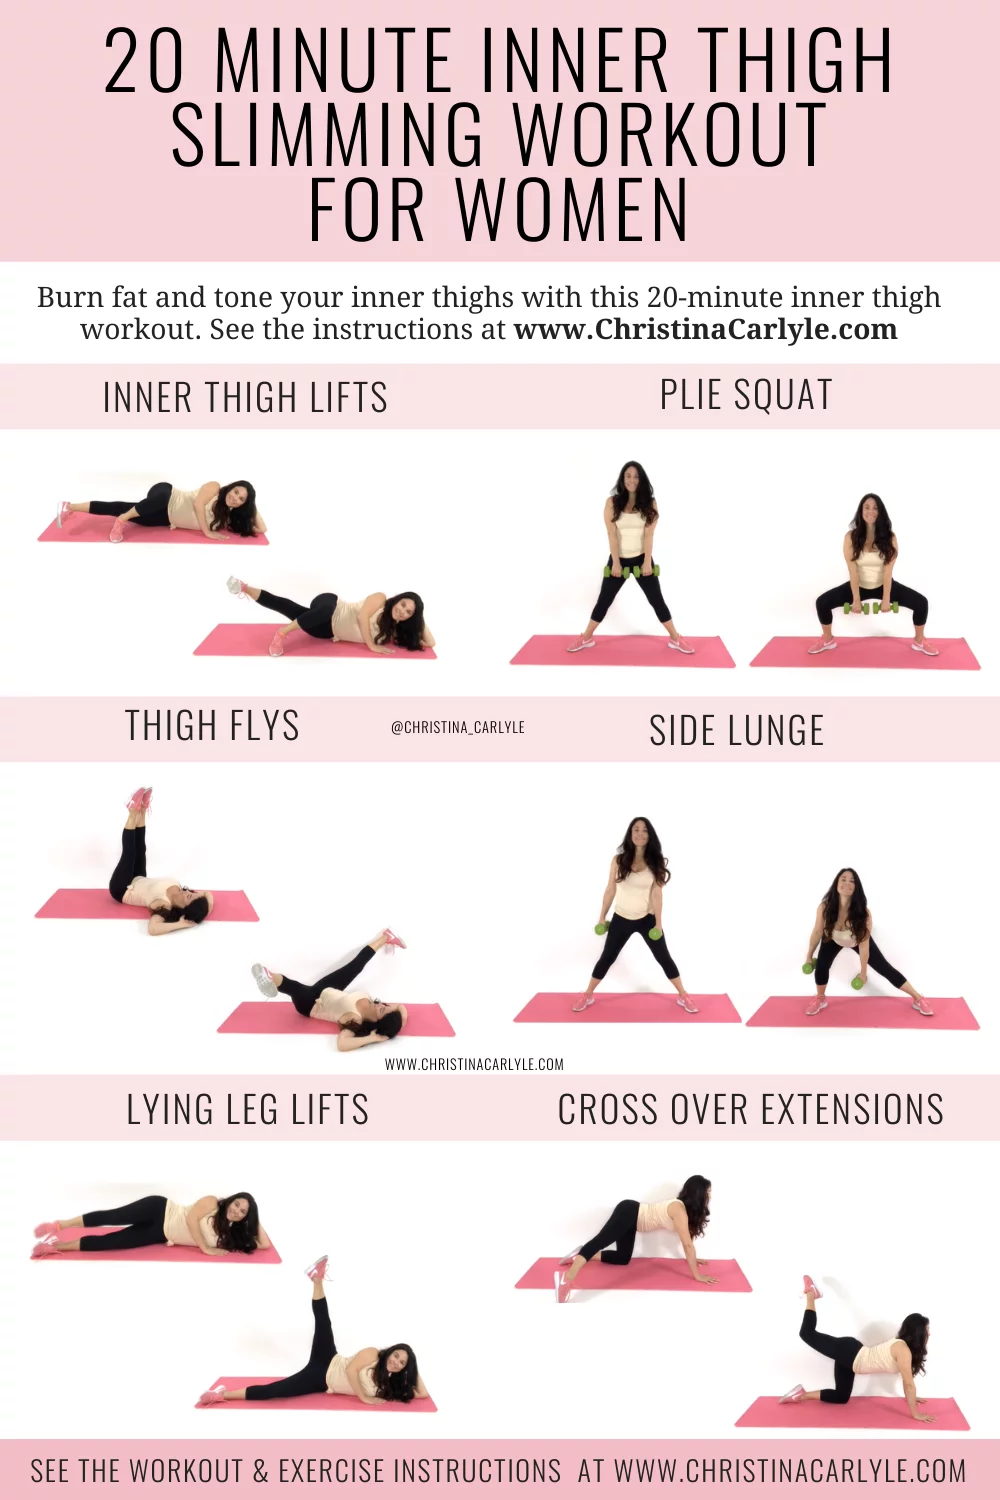 Stretching Inner Thigh by Ameenah A. - Exercise How-to - Skimble